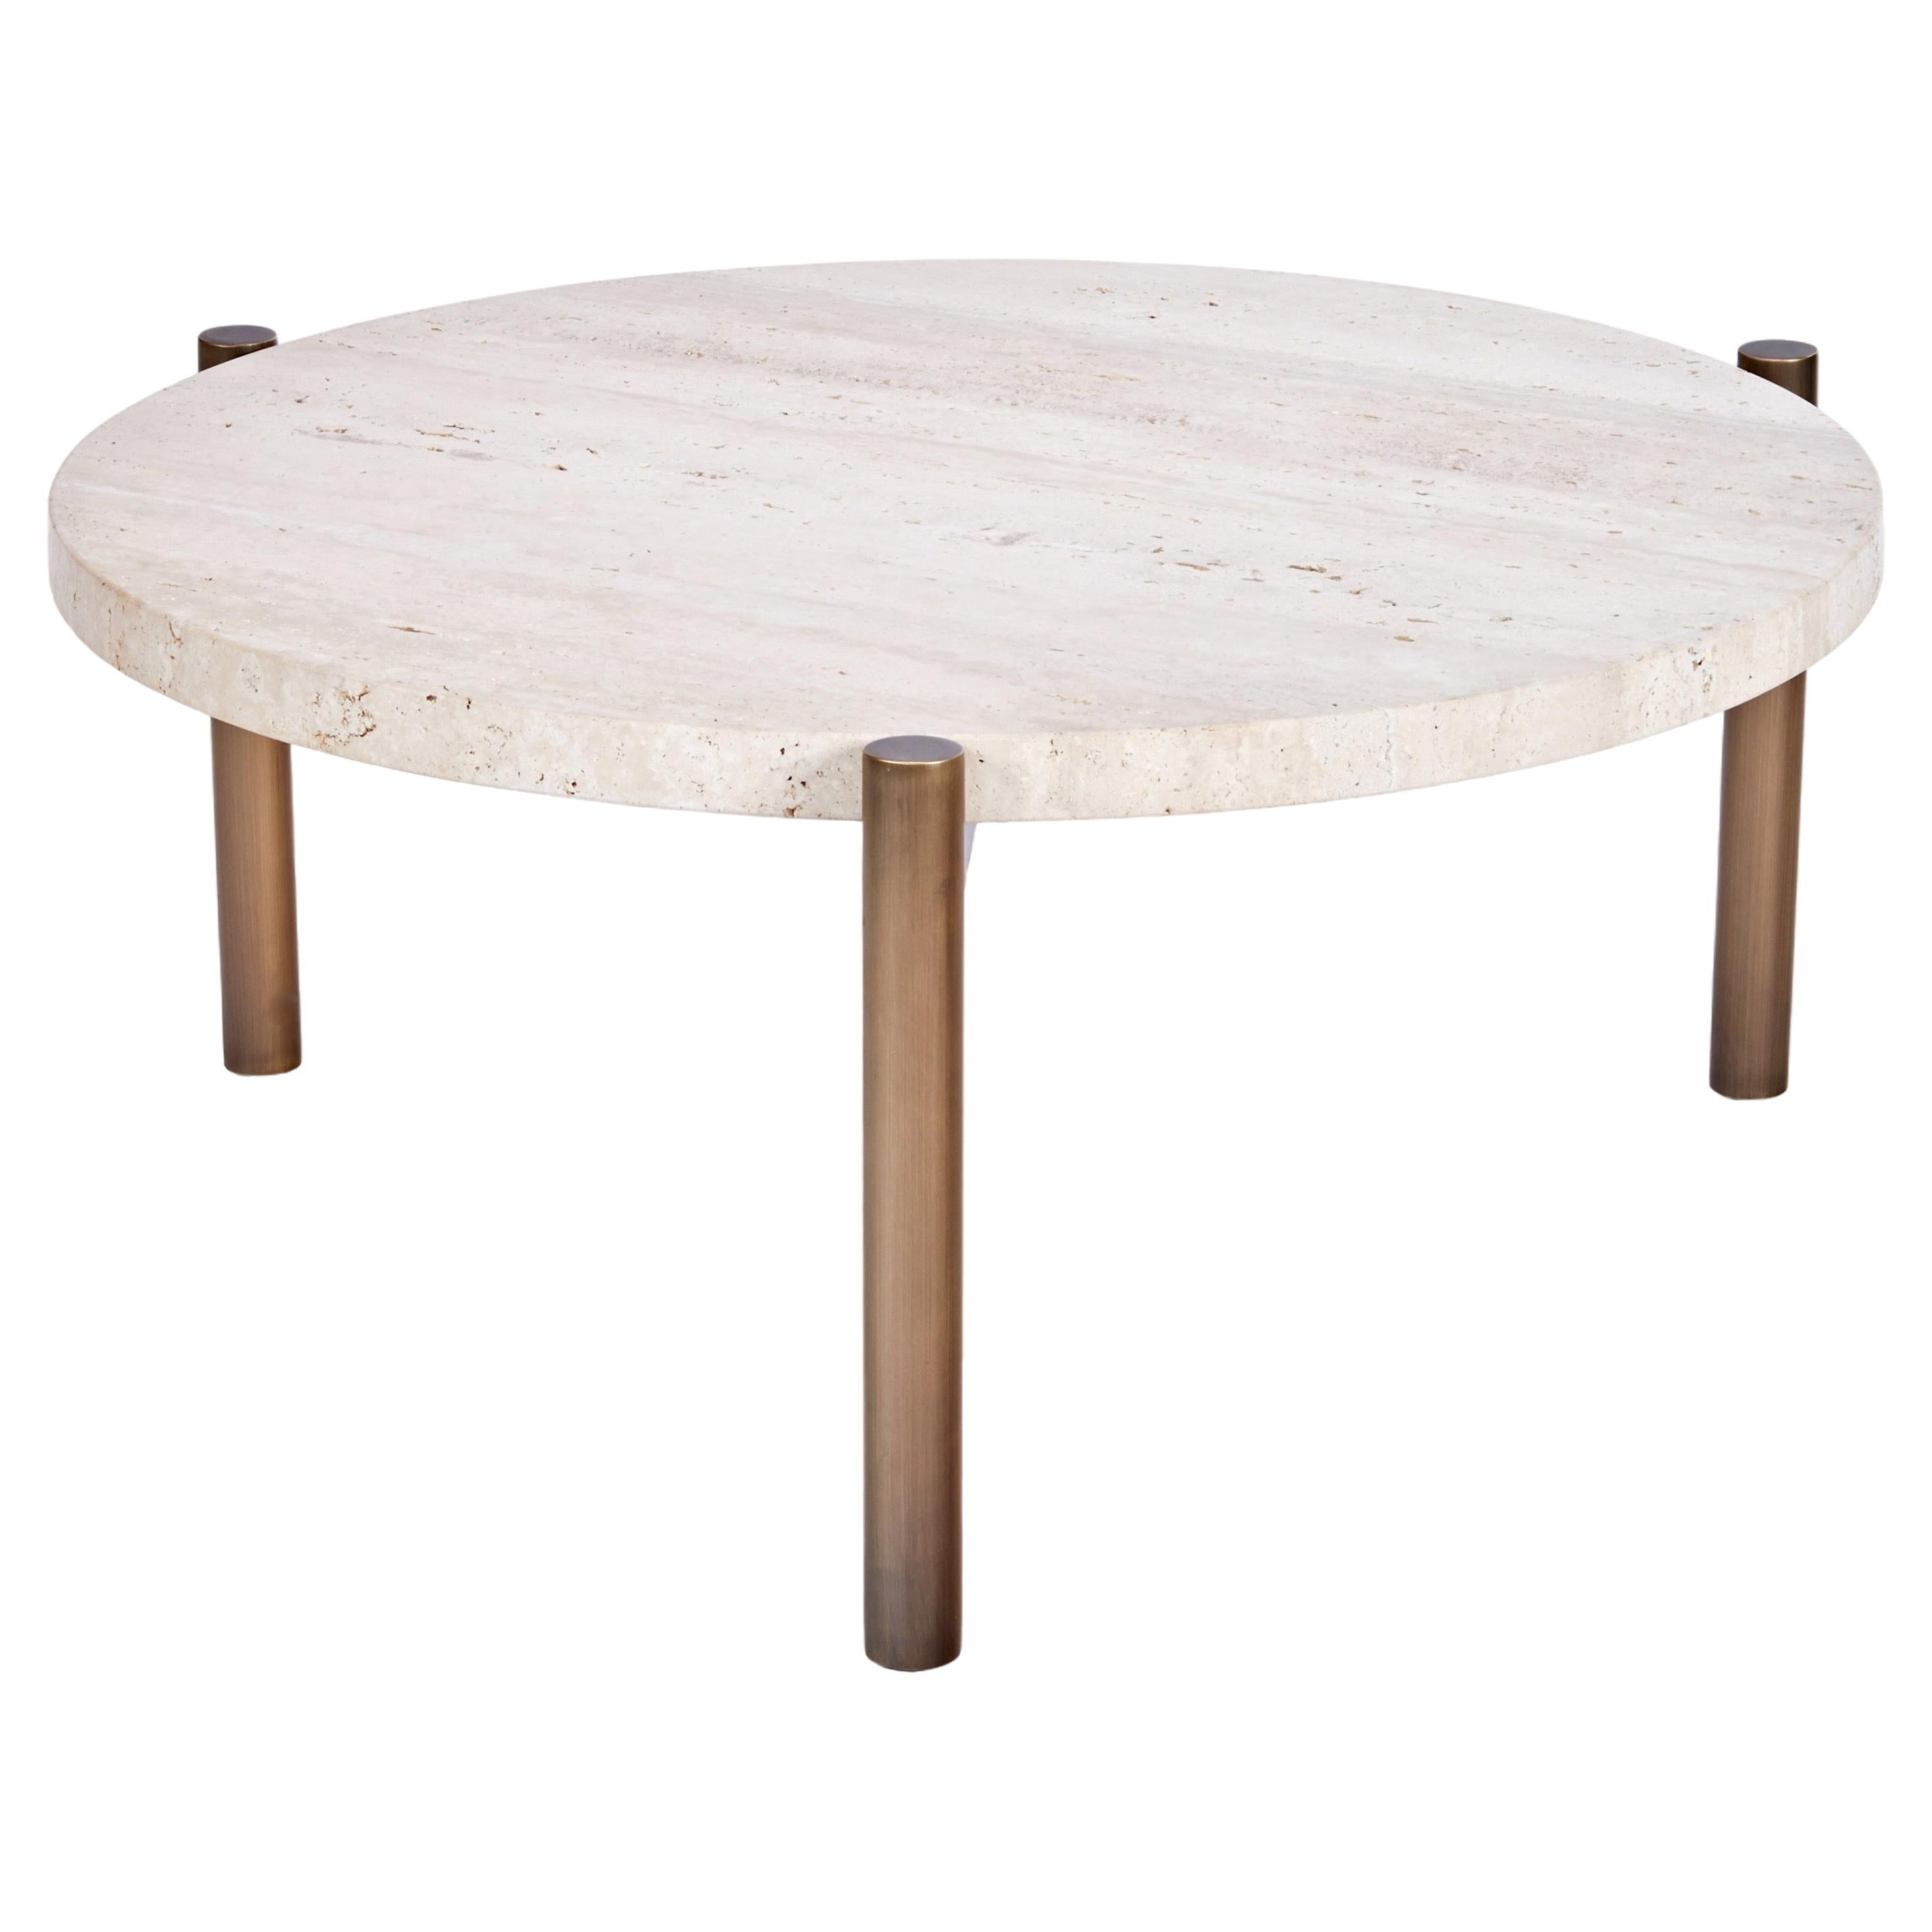 Tivoli Side Table Round 26 "D 3 Legs Burnished Brass Plated Base + Travertine Top en vente